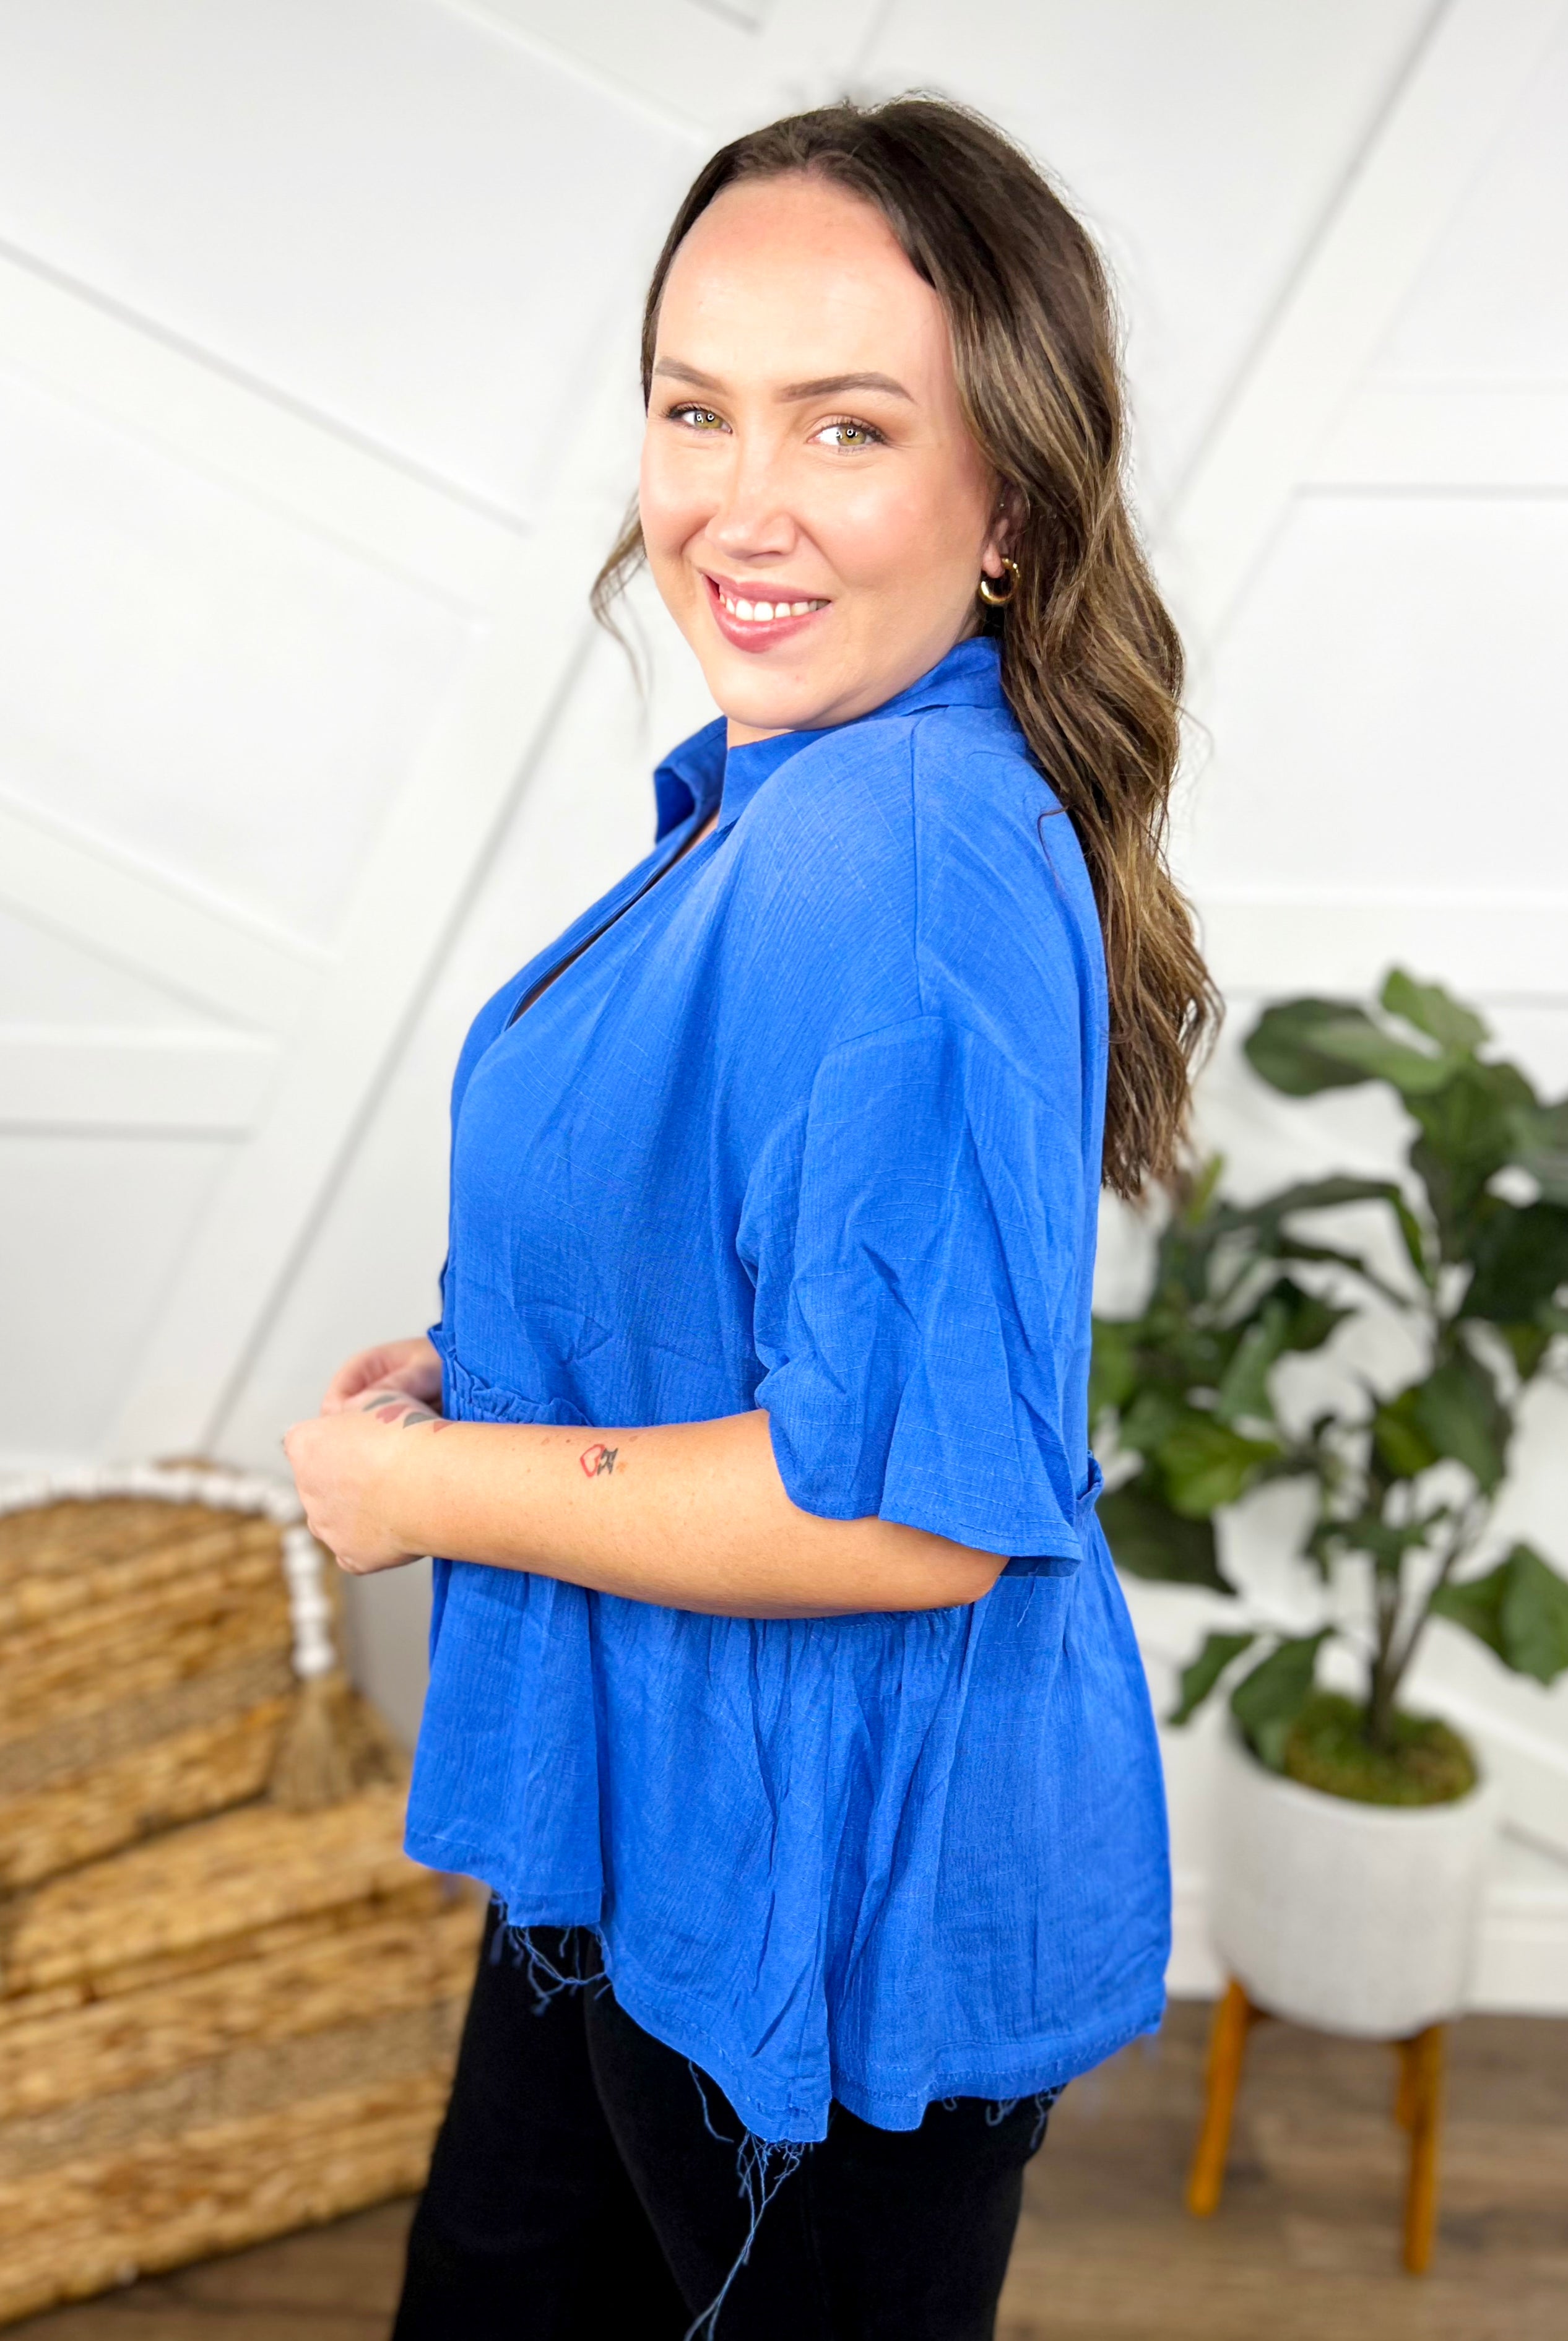 Babe Status Top-110 Short Sleeve Top-Oddi-Heathered Boho Boutique, Women's Fashion and Accessories in Palmetto, FL